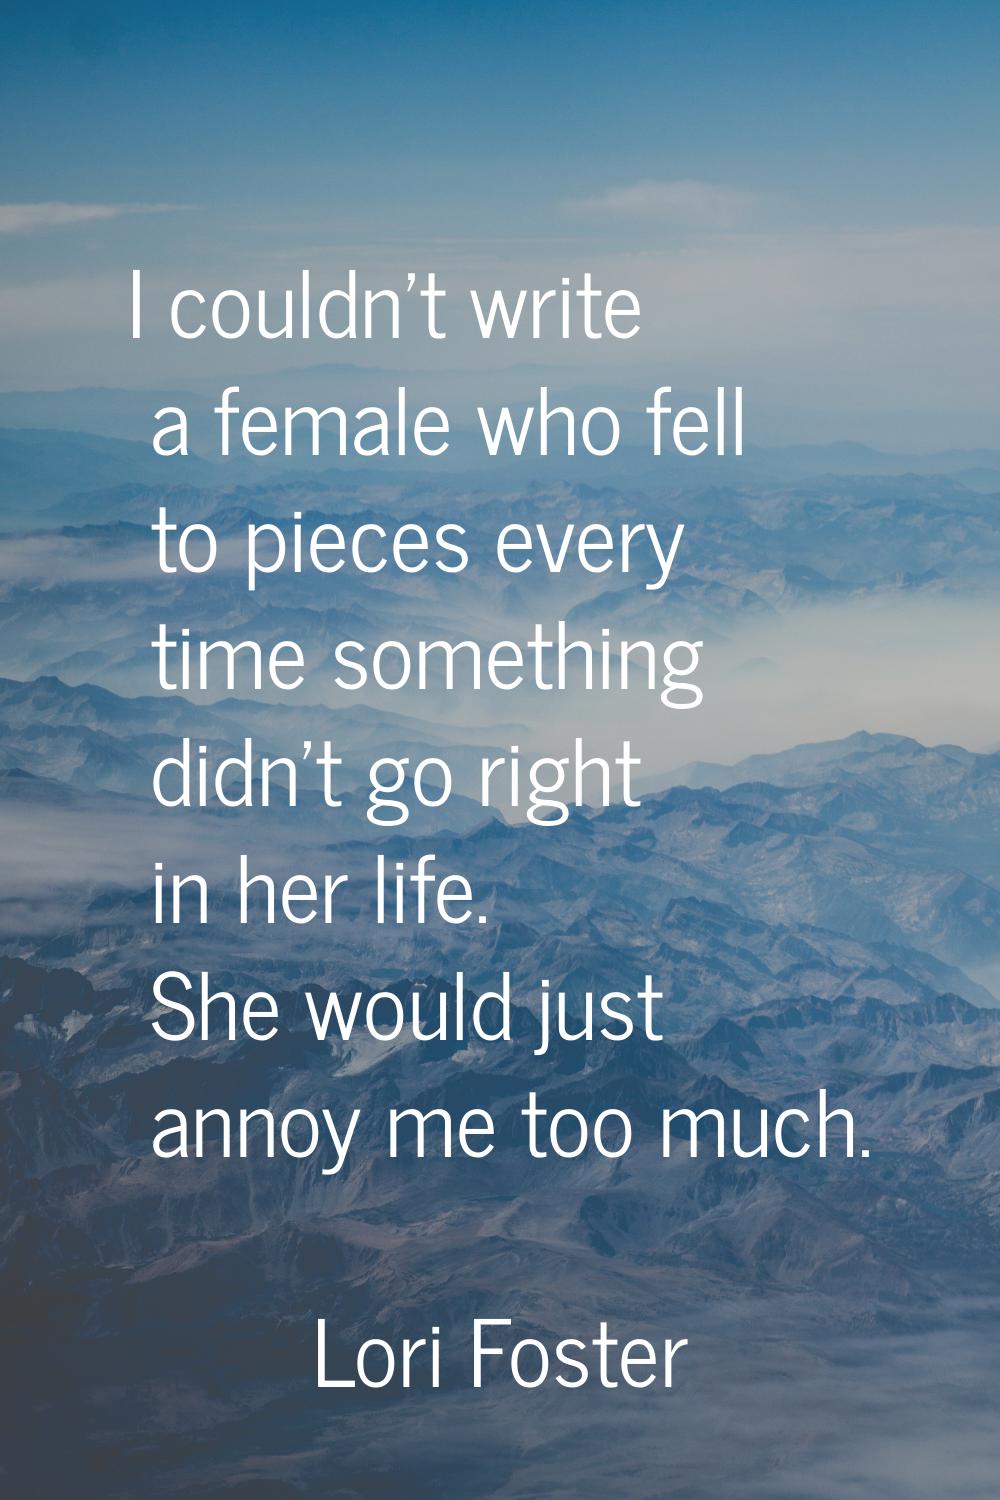 I couldn't write a female who fell to pieces every time something didn't go right in her life. She 